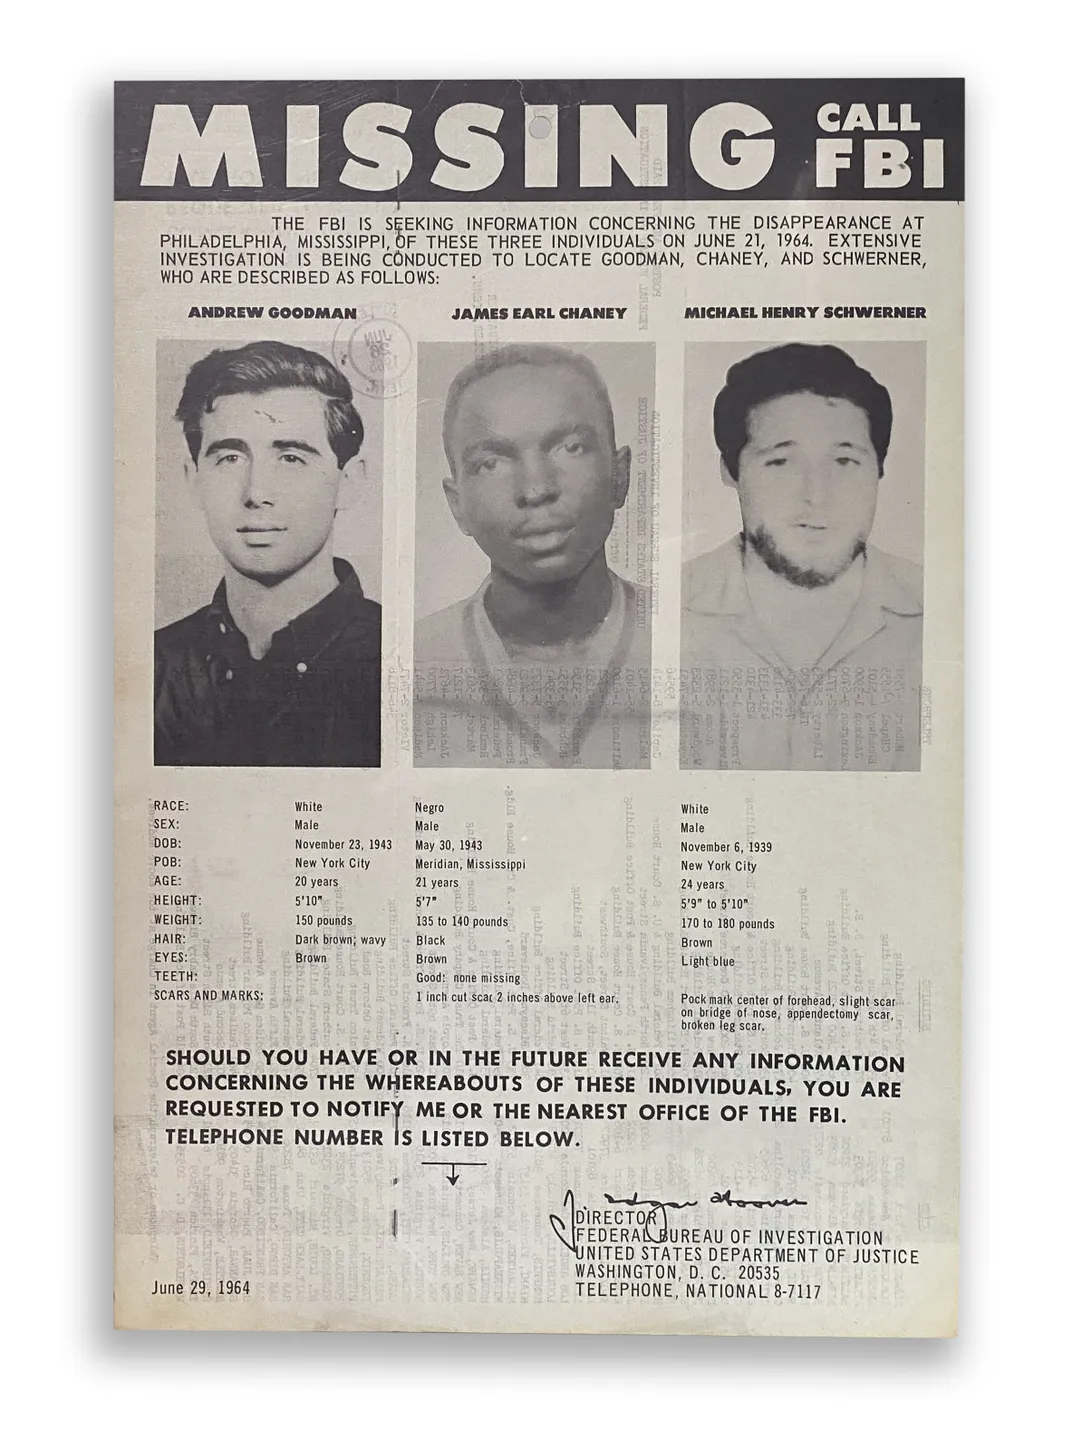 FBI missing poster for three Freedom Riders murdered in Mississippi in 1964